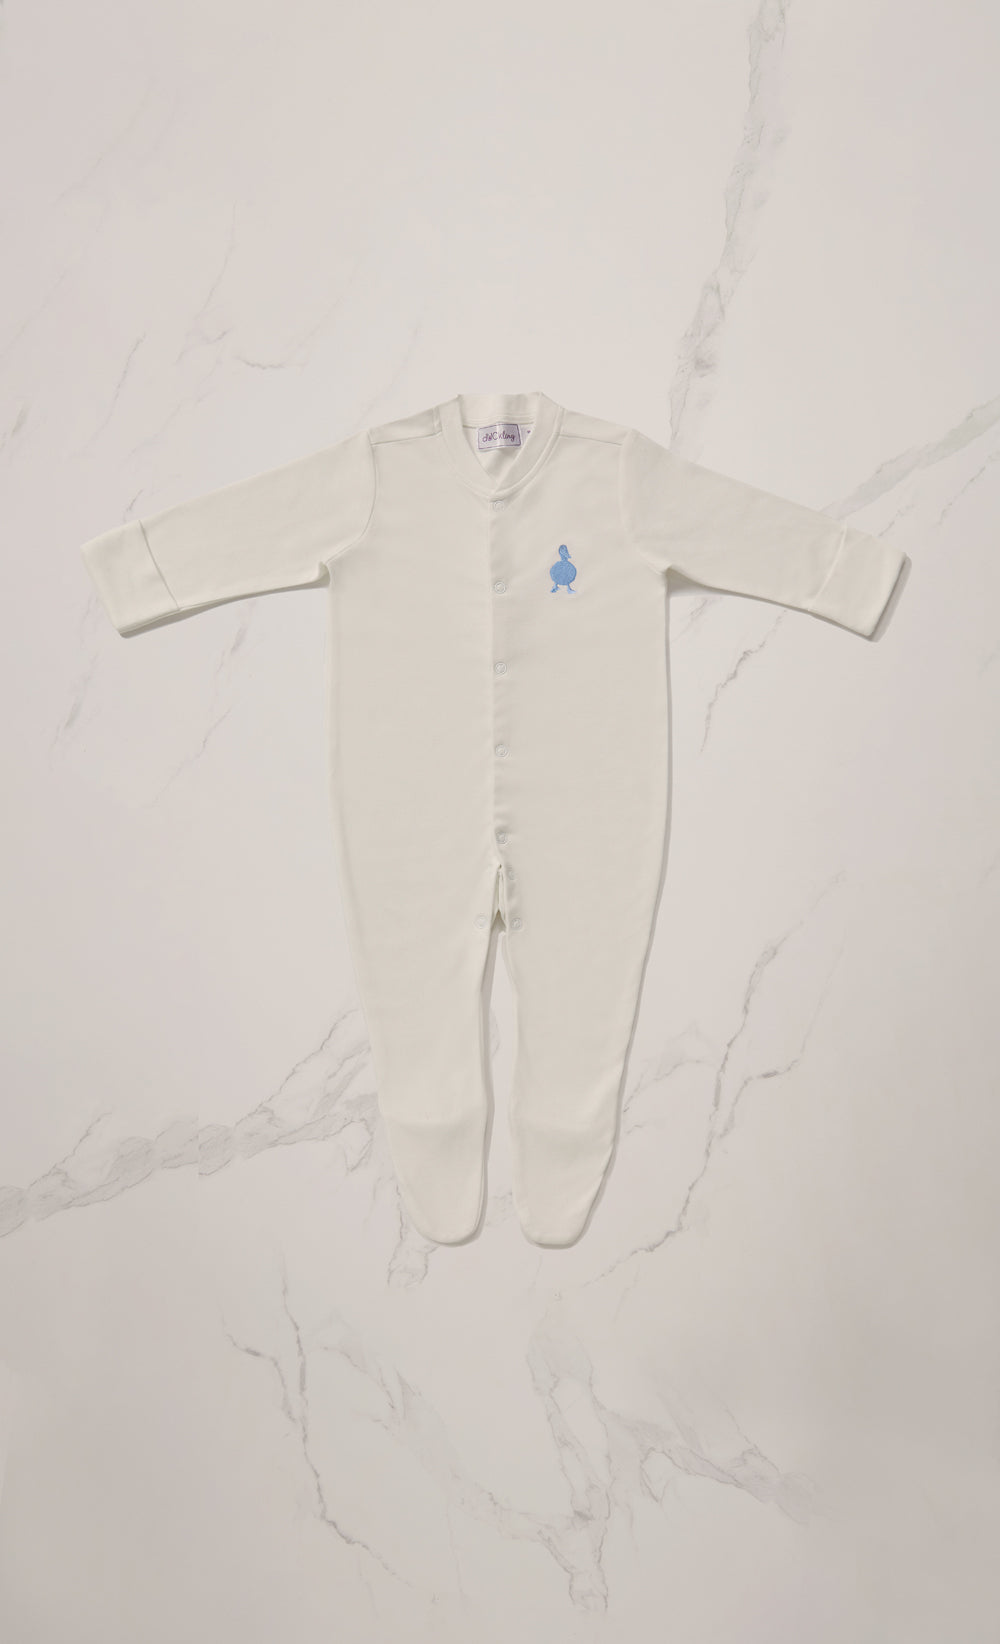 dUCkling Bamboo Romper in Bubbles